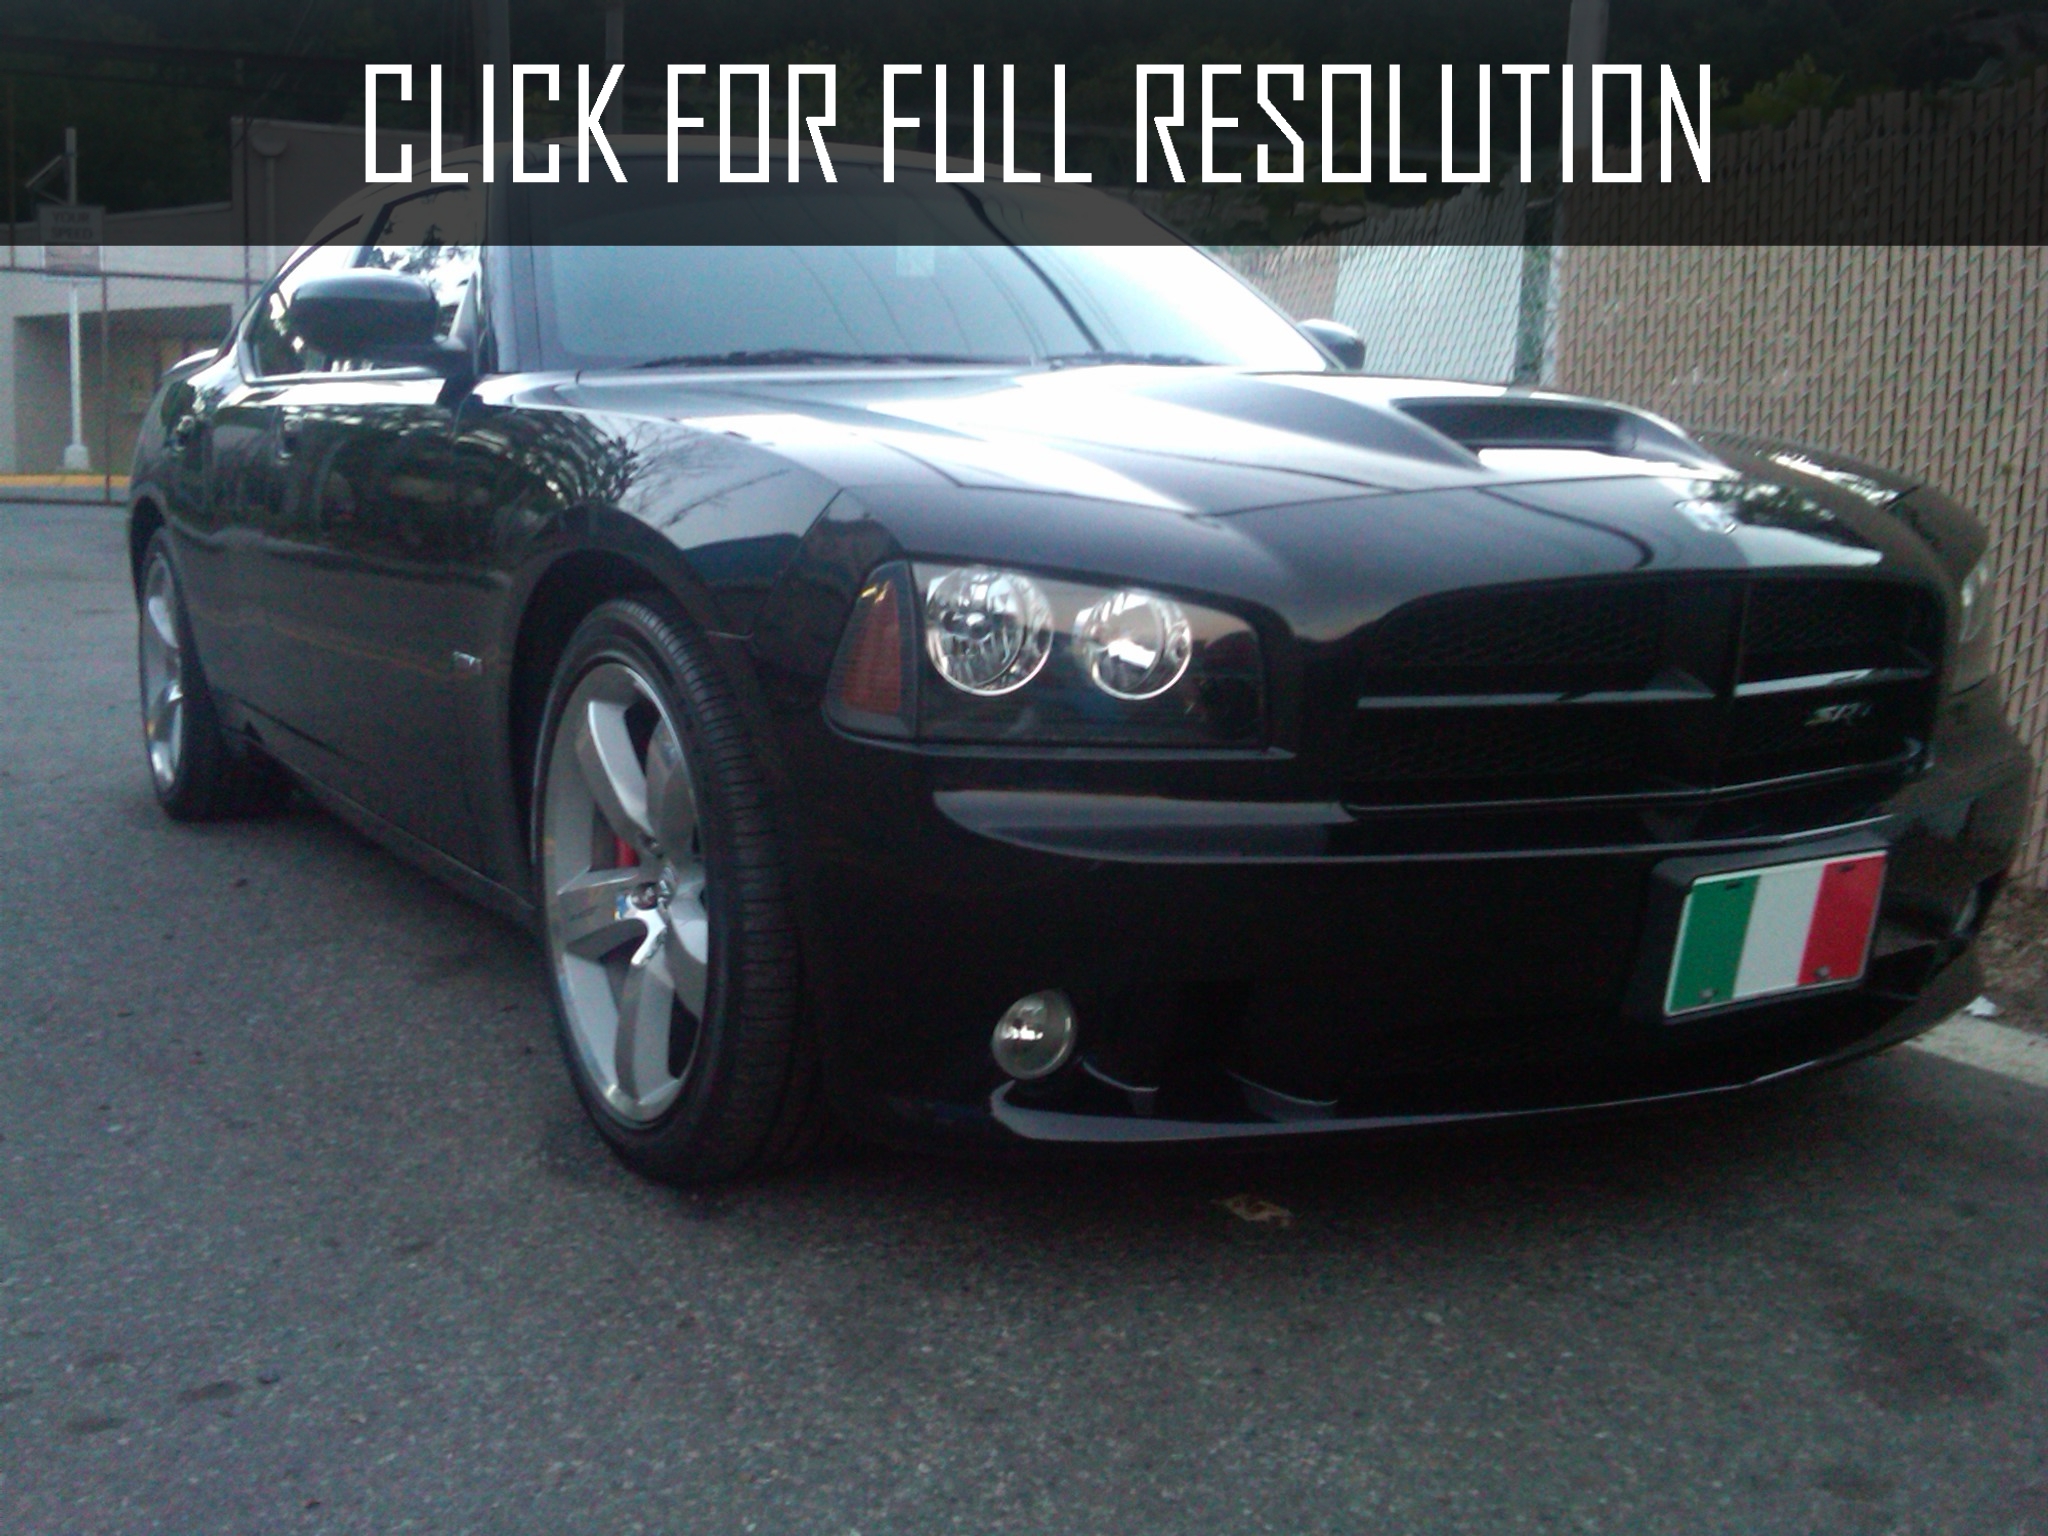 2008 Dodge Charger Srt8 Best Image Gallery 6 16 Share And